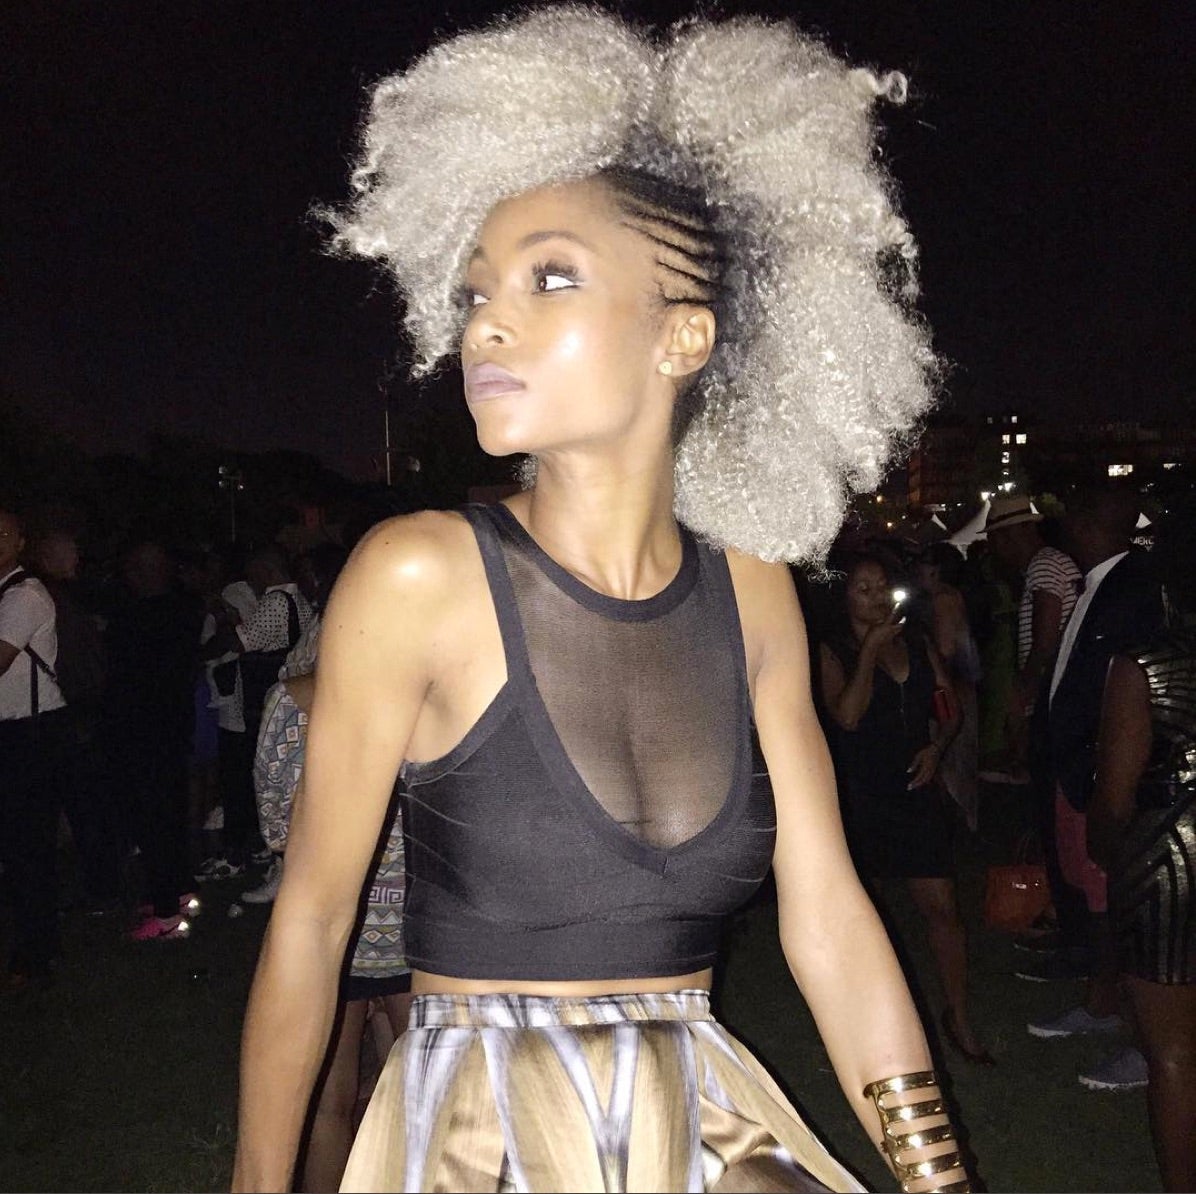 Celebs Rocking Out at the 2015 AFROPUNK Festival
